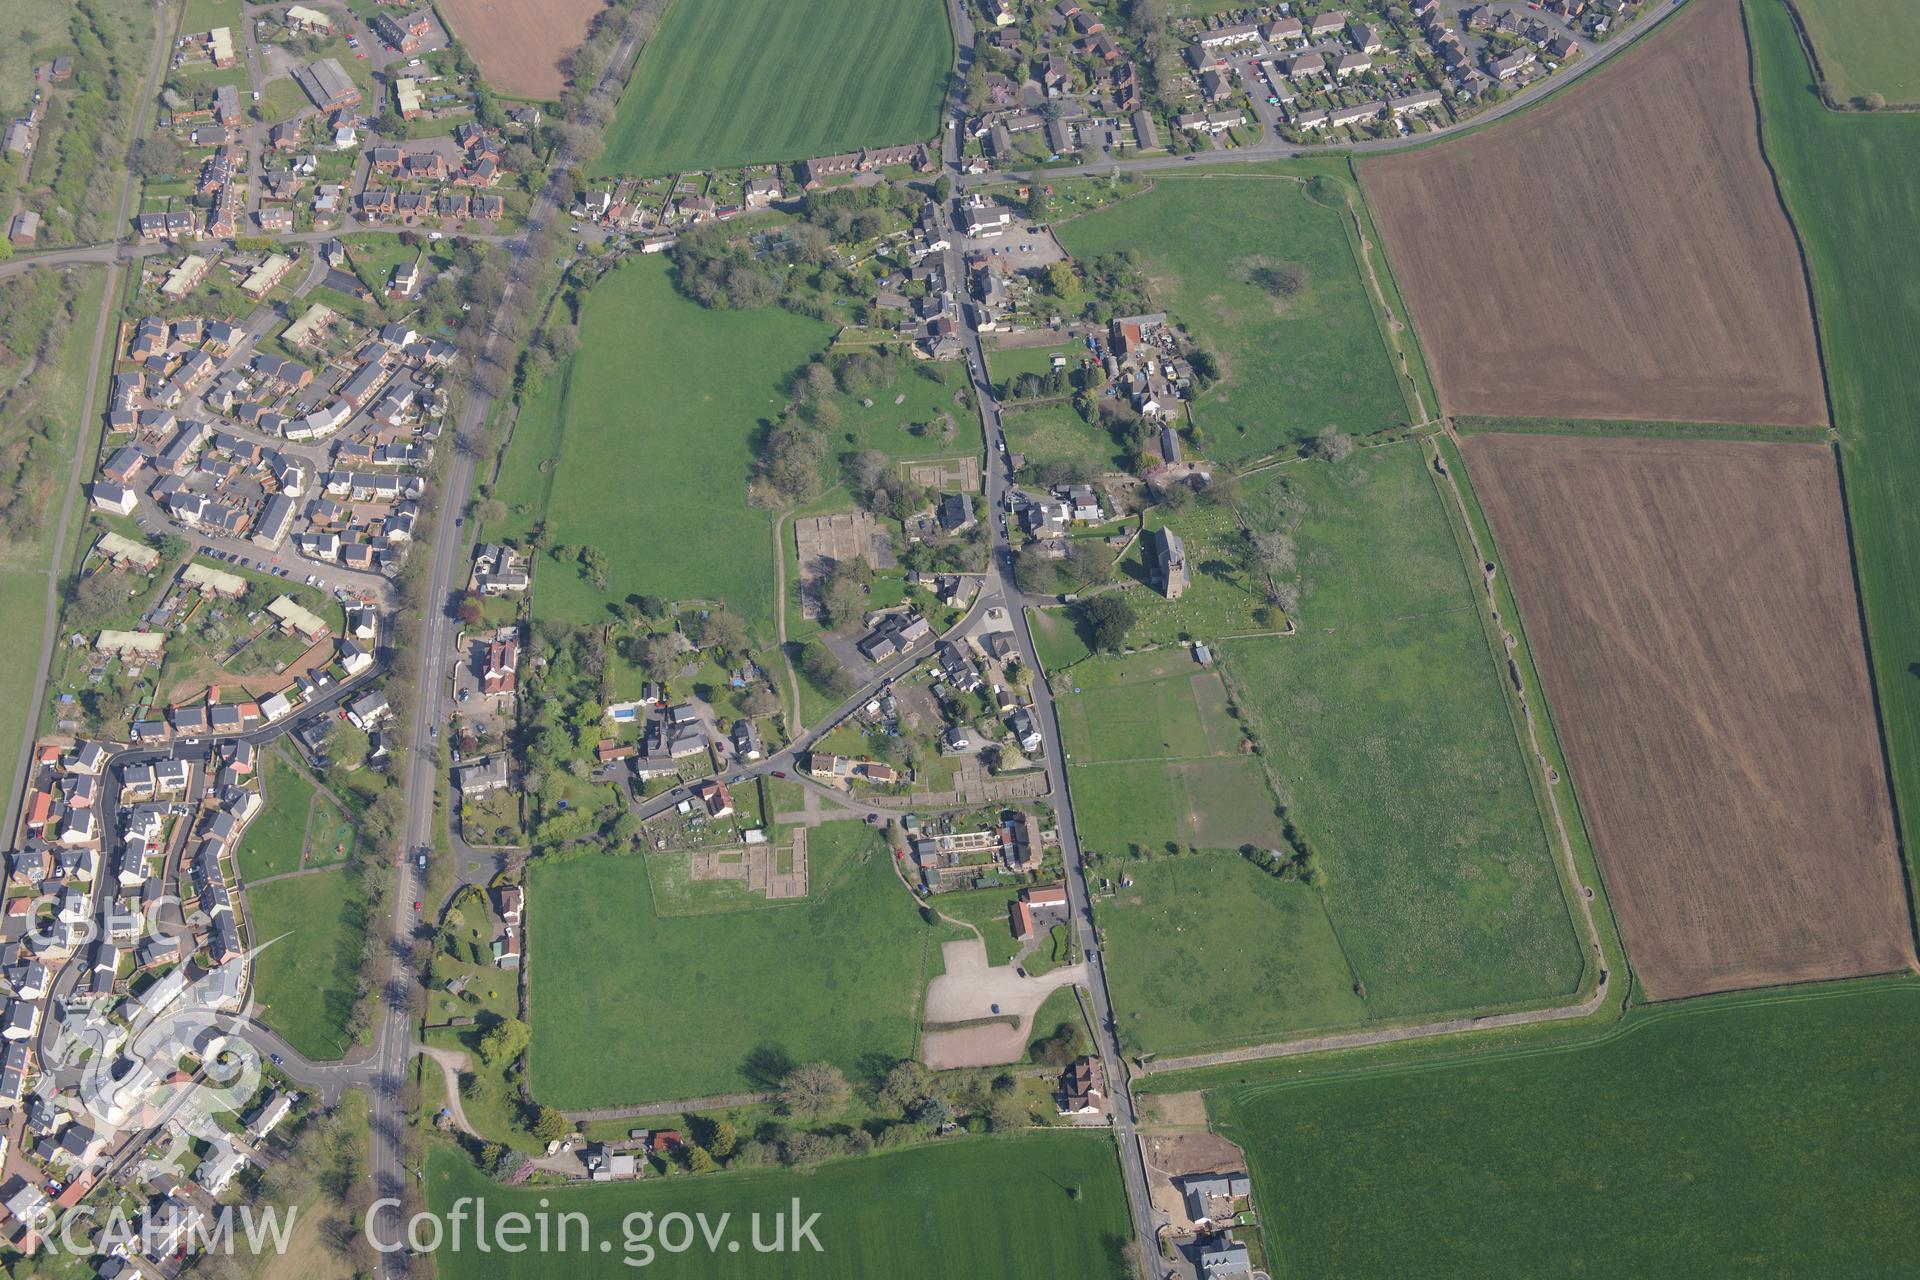 Caerwent village and Roman city including views of the Roman Amphitheatre and Basilica and Forum; St. Stephen's Church; Caerwent Baptist Chapel; Caerwent House; Great House; Caerwent Institute and West Gate Farm. Oblique aerial photograph taken during the Royal Commission's programme of archaeological aerial reconnaissance by Toby Driver on 21st April 2015.